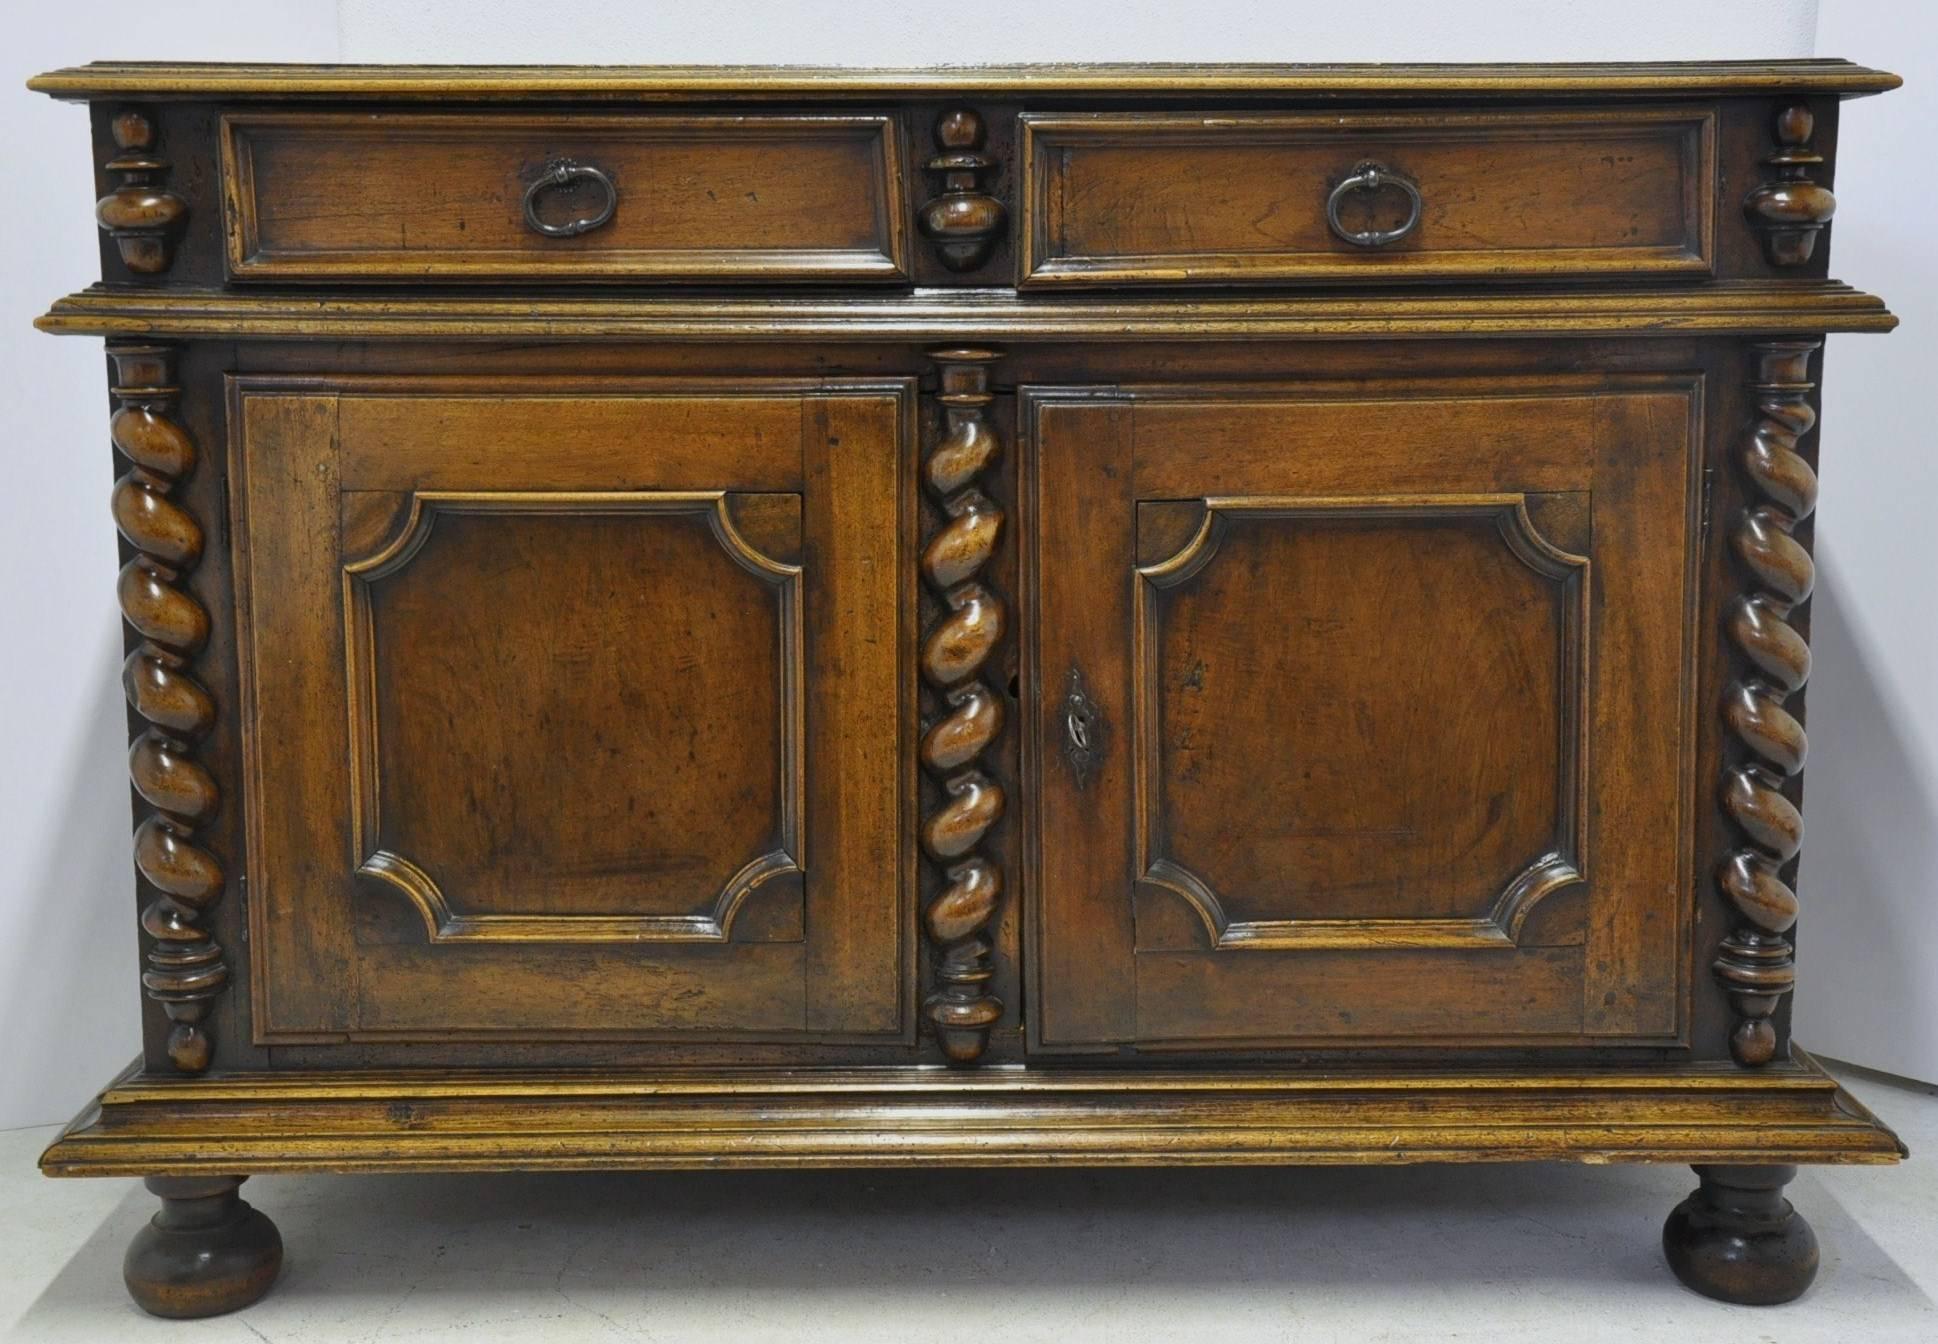 This elegant antique fruitwood buffet was crafted in southwest France, circa 1750. The cabinet stands on front bun feet over a carved plinth, and features a pair of doors with raised panels flanked with three hand carved barley twist columns on each